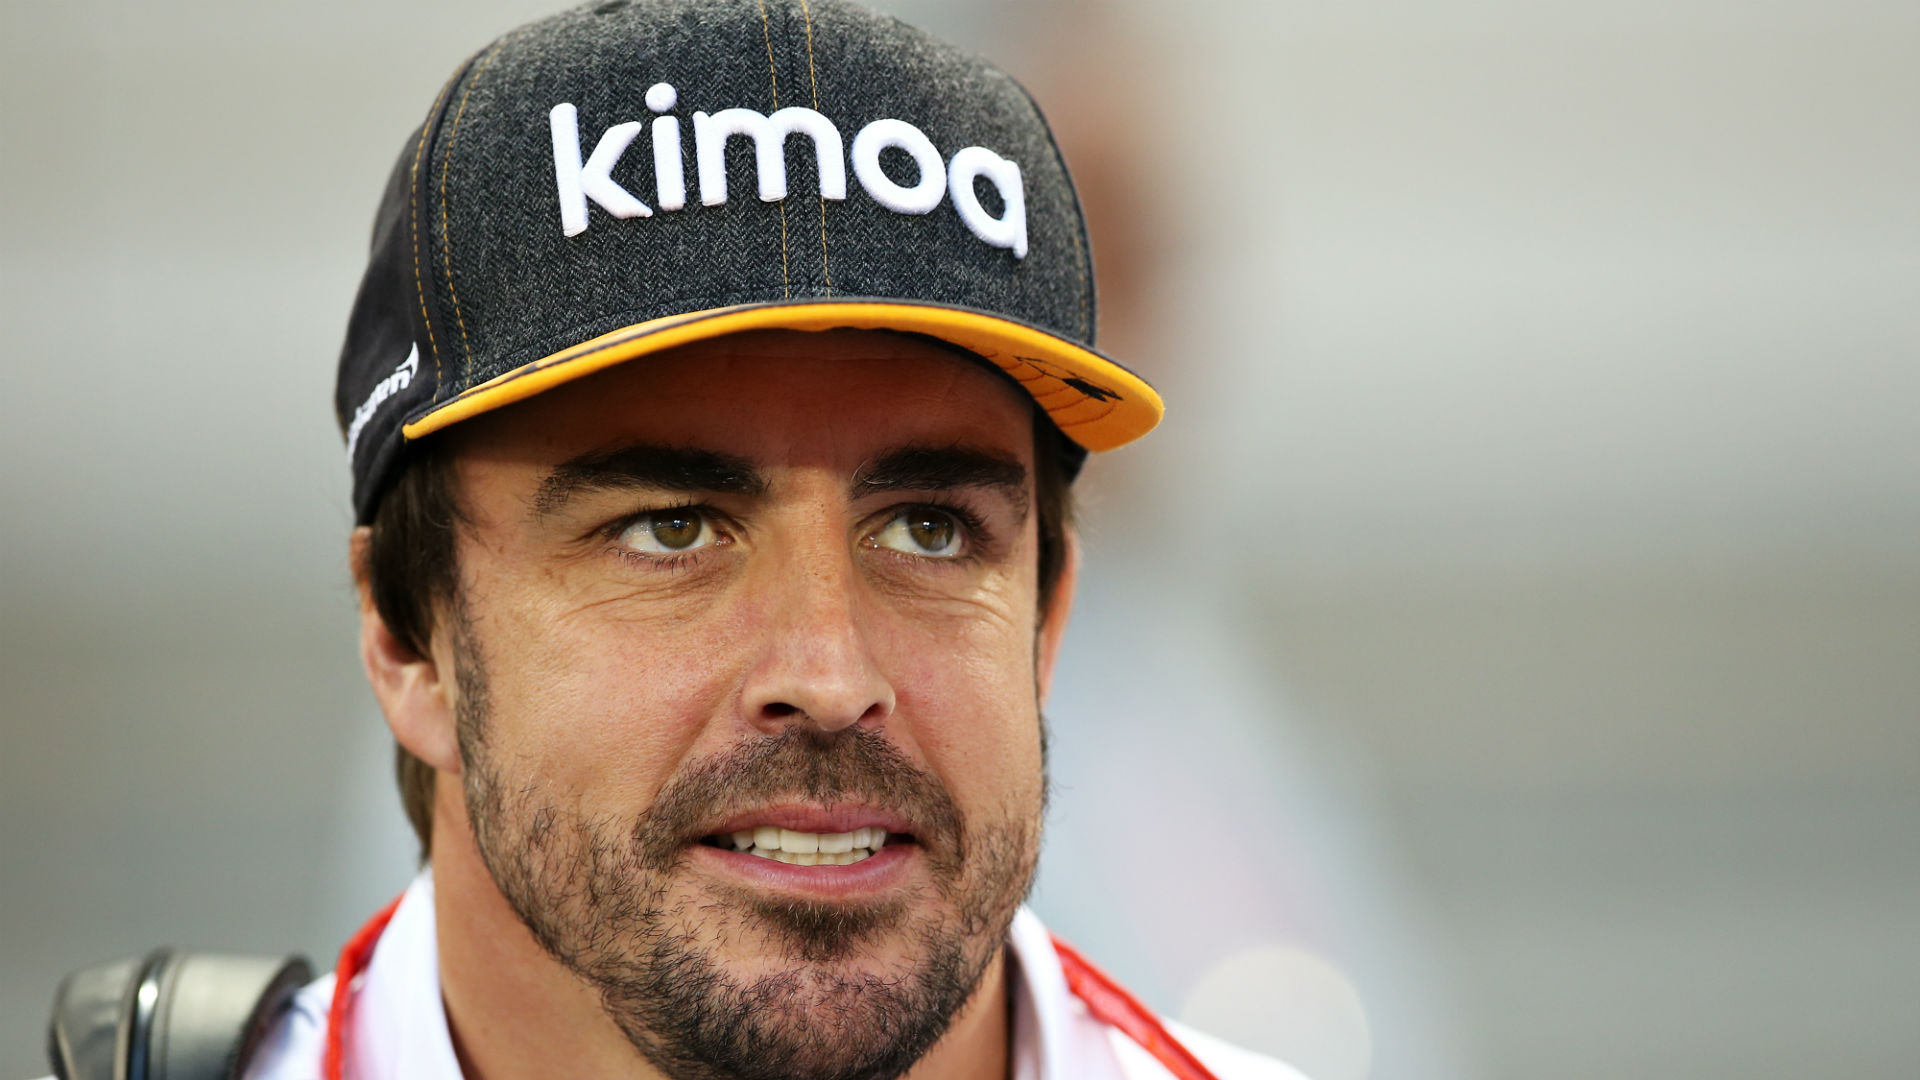 Alonso discharged from hospital after cycling accident